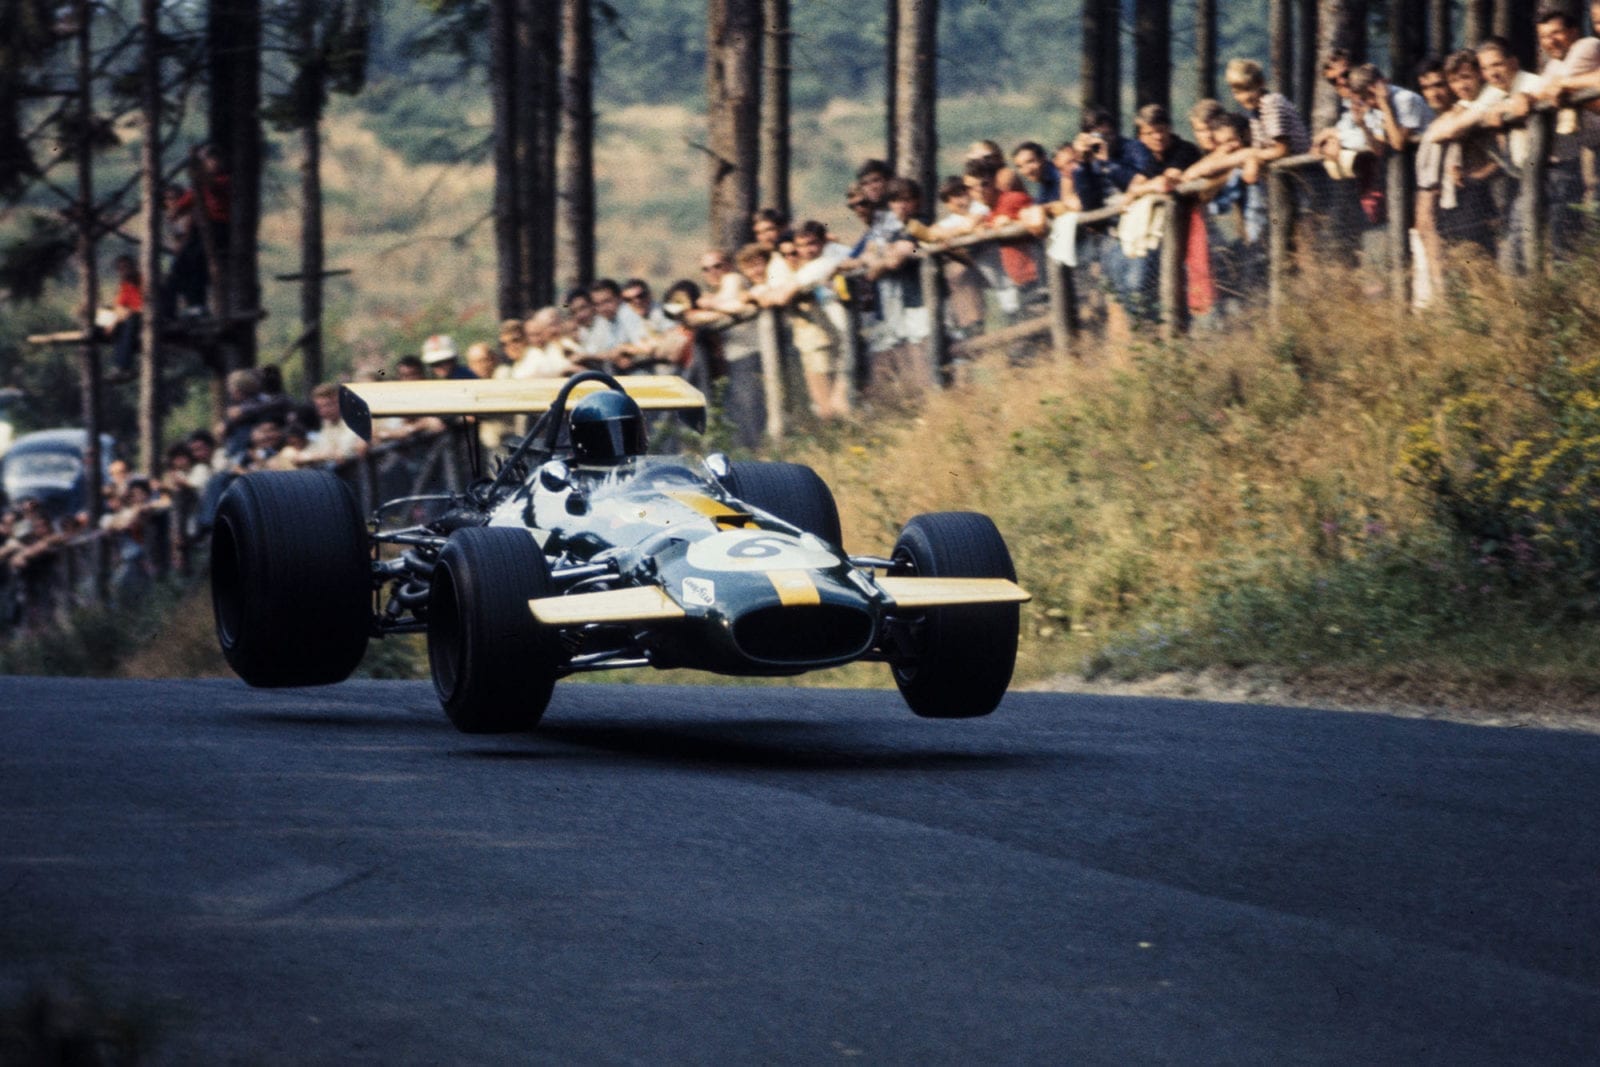 Jacky Ickx's car takes off as he goes through the flugplatz